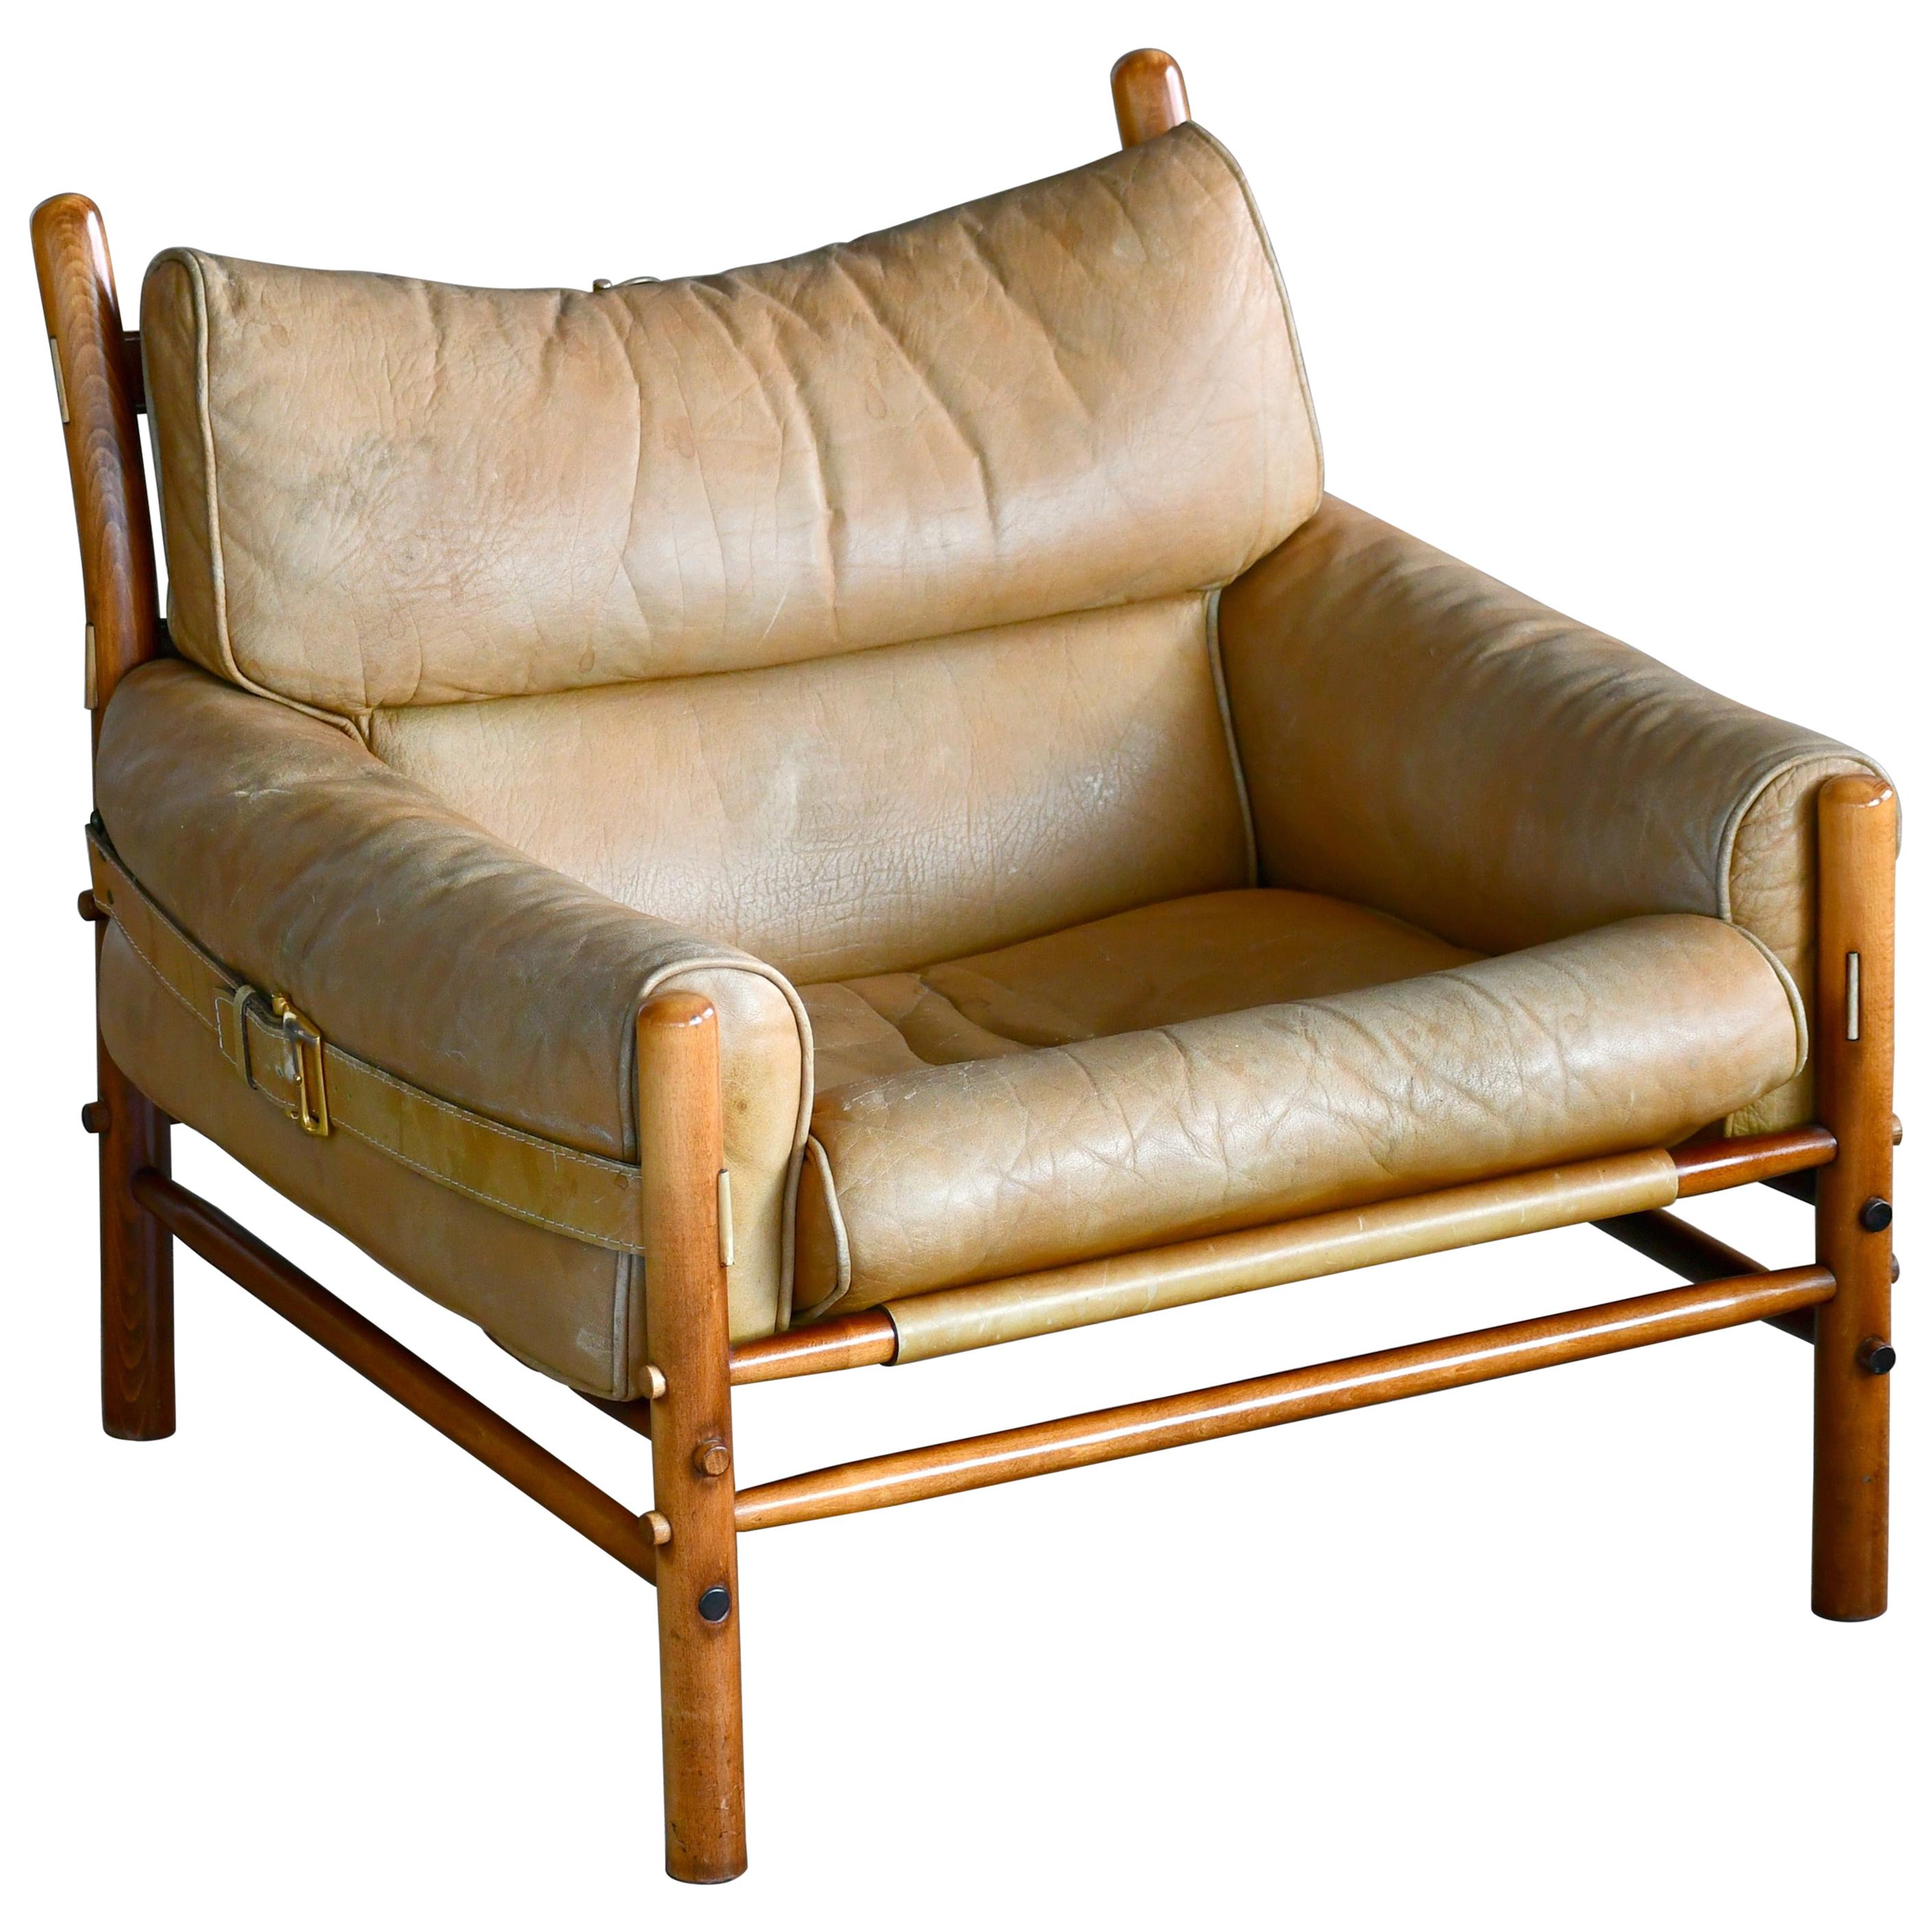 Arne Norell 1960s Safari Easy Chair Low Model Inca in Patinated Tan Leather